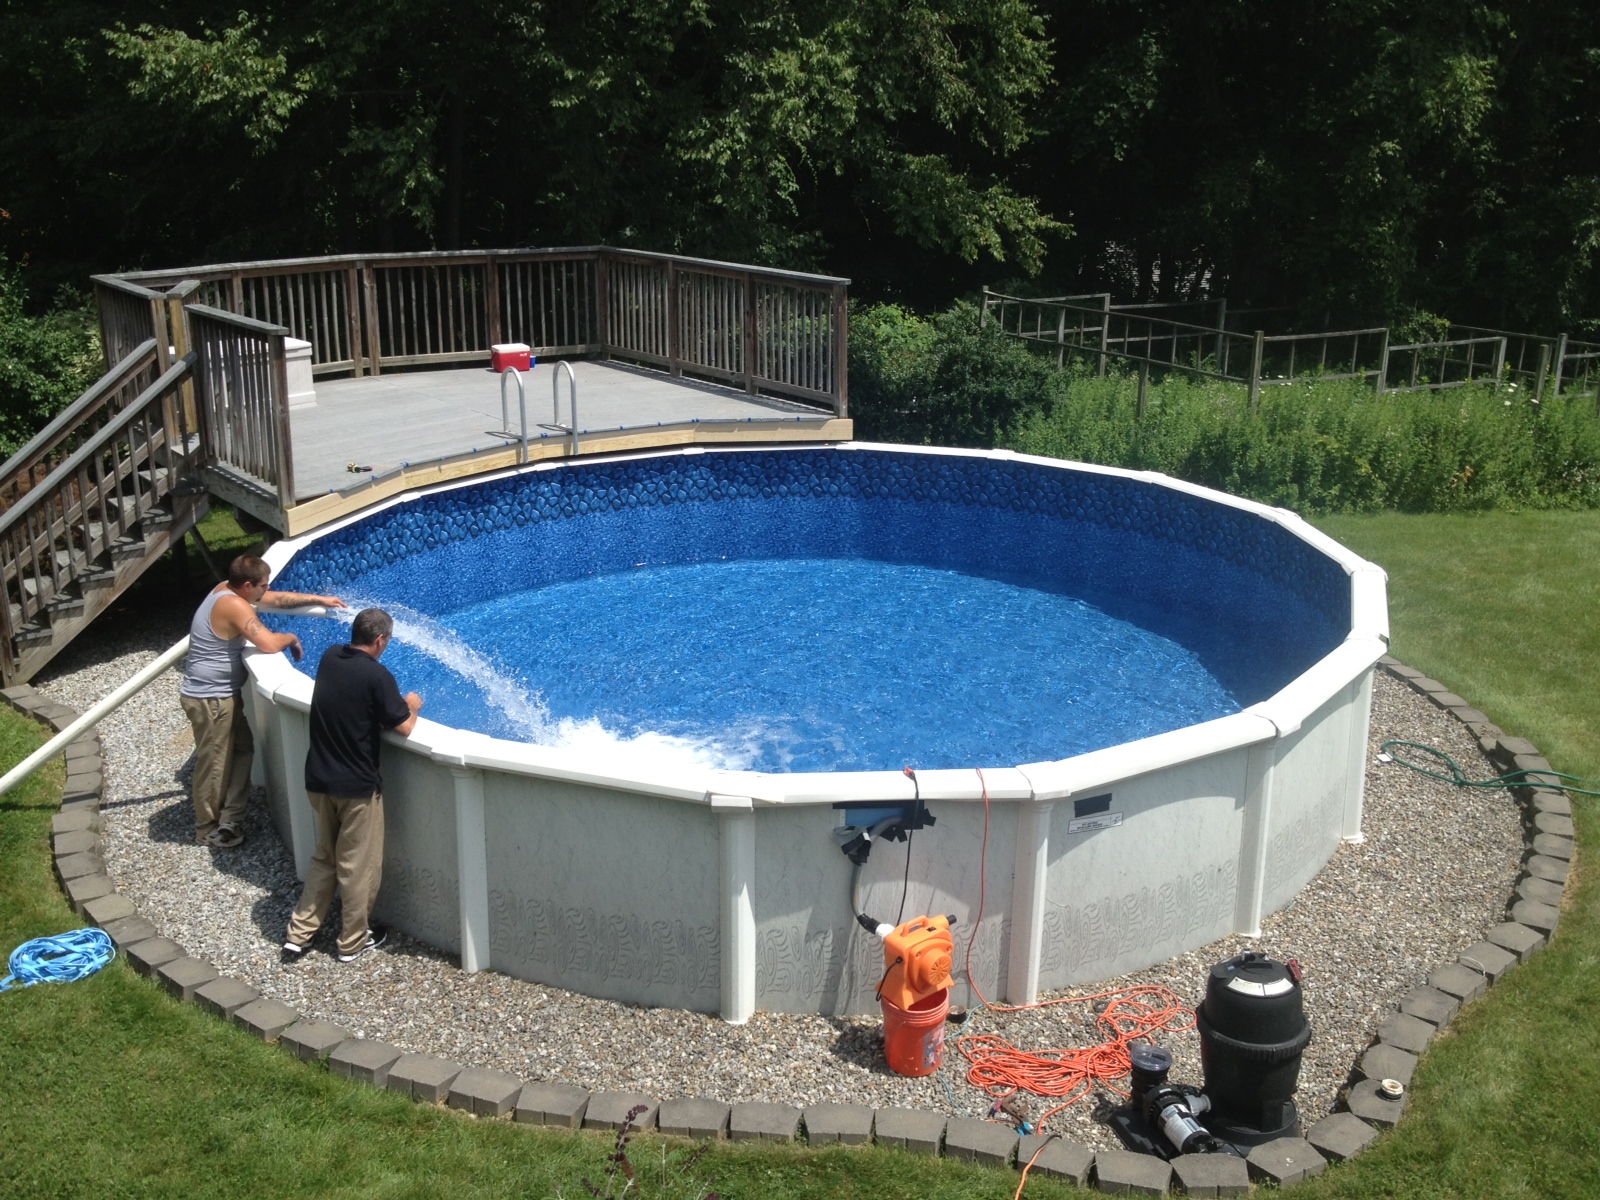 How to Level Ground for Above Ground Pool? - Pool University